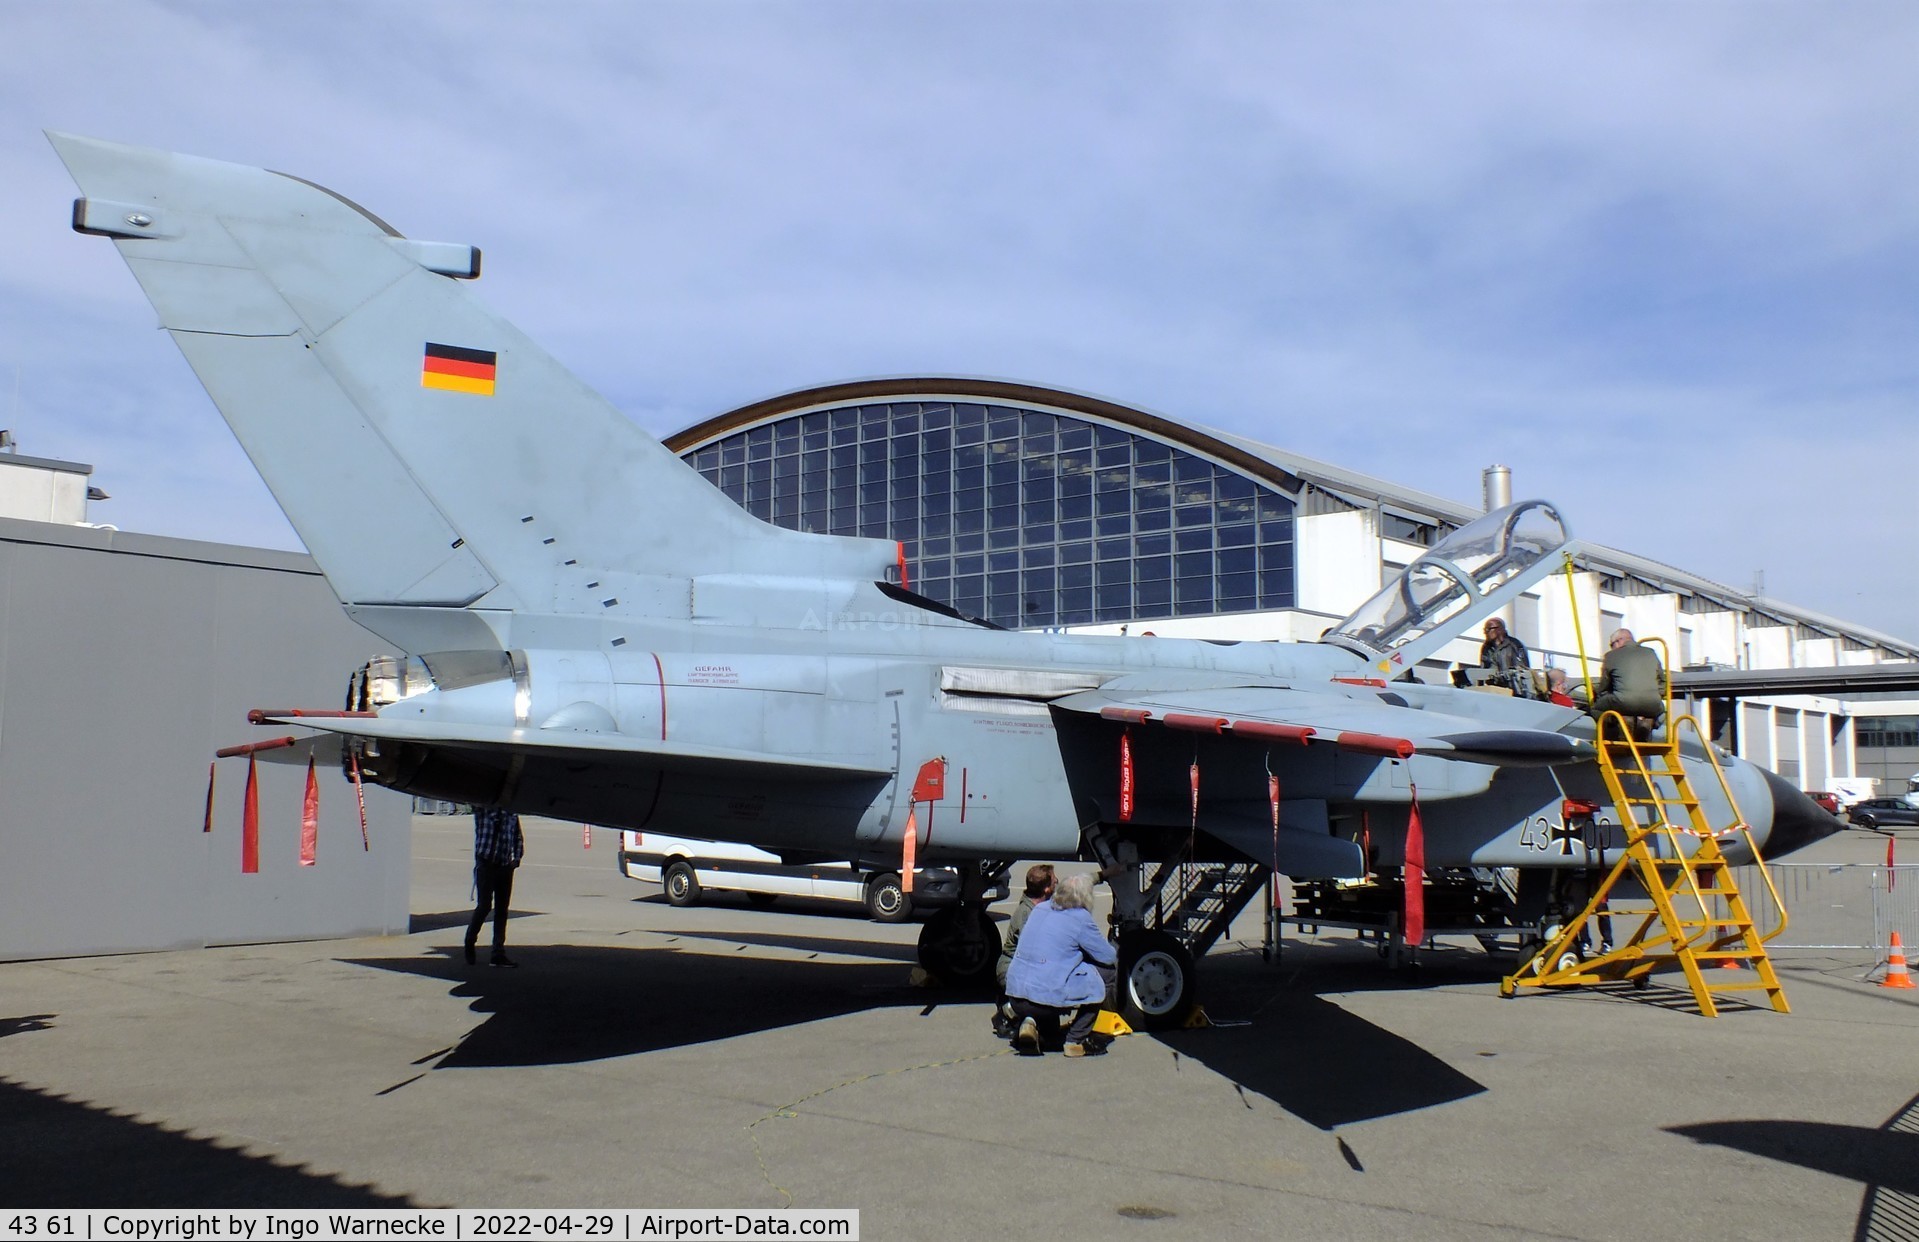 43 61, Panavia Tornado IDS C/N 162/GS034/4061, Panavia Tornado IDS of the Luftwaffe (German Air Force) (now a travelling exhibit with reg 43+00) at the AERO 2022, Friedrichshafen